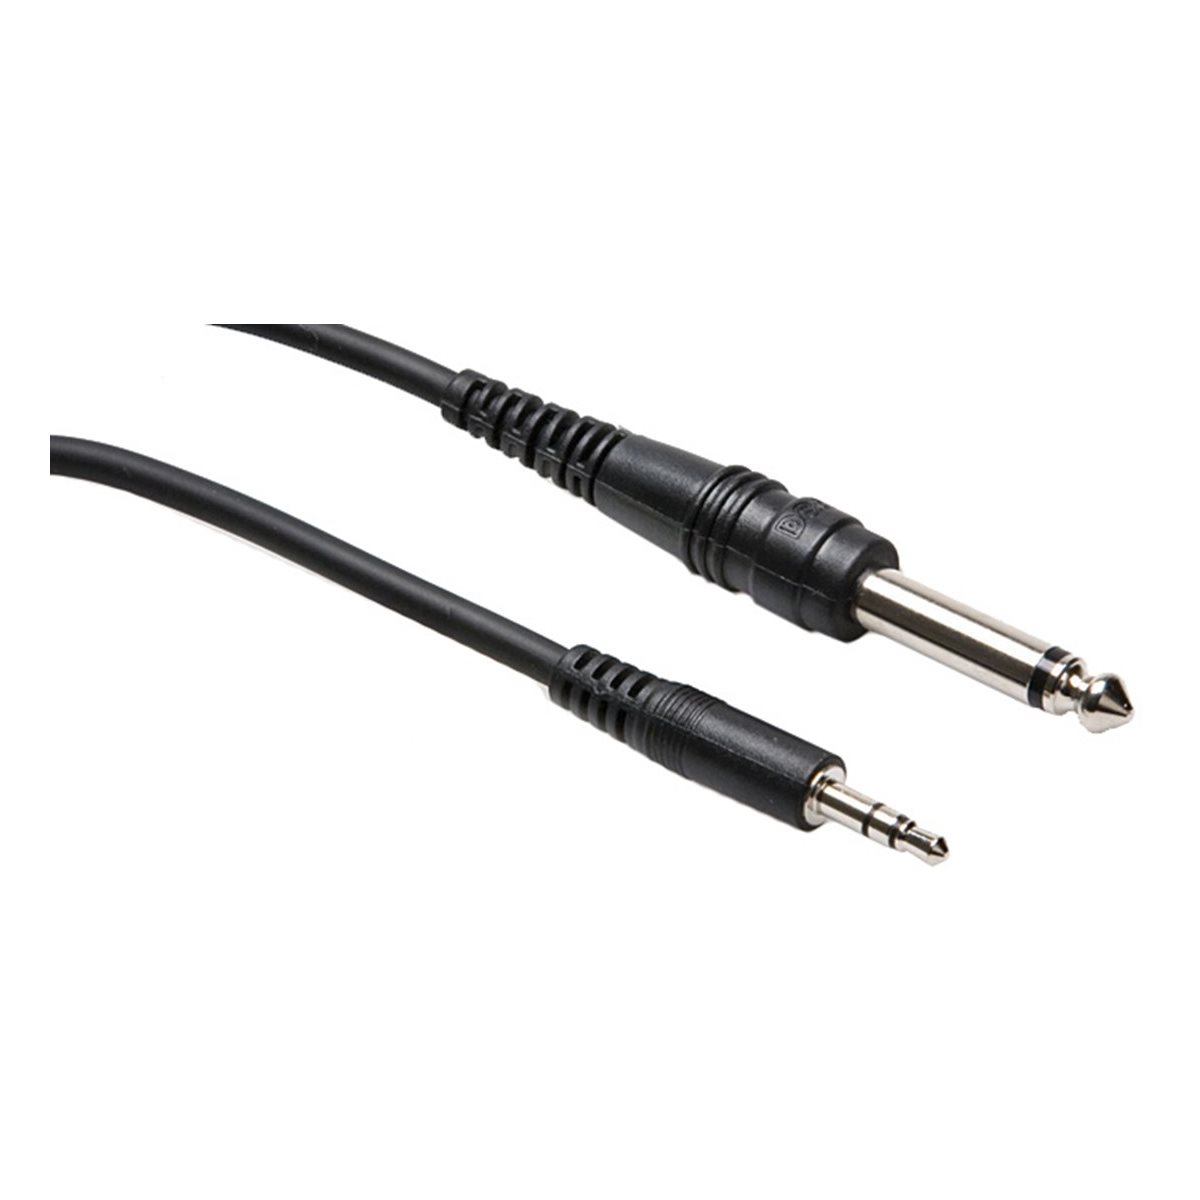 HOSA - CMP103 - Interconnect Cable - 3.5mm TRS Male to 1 / 4-inch TS Male - 3ft